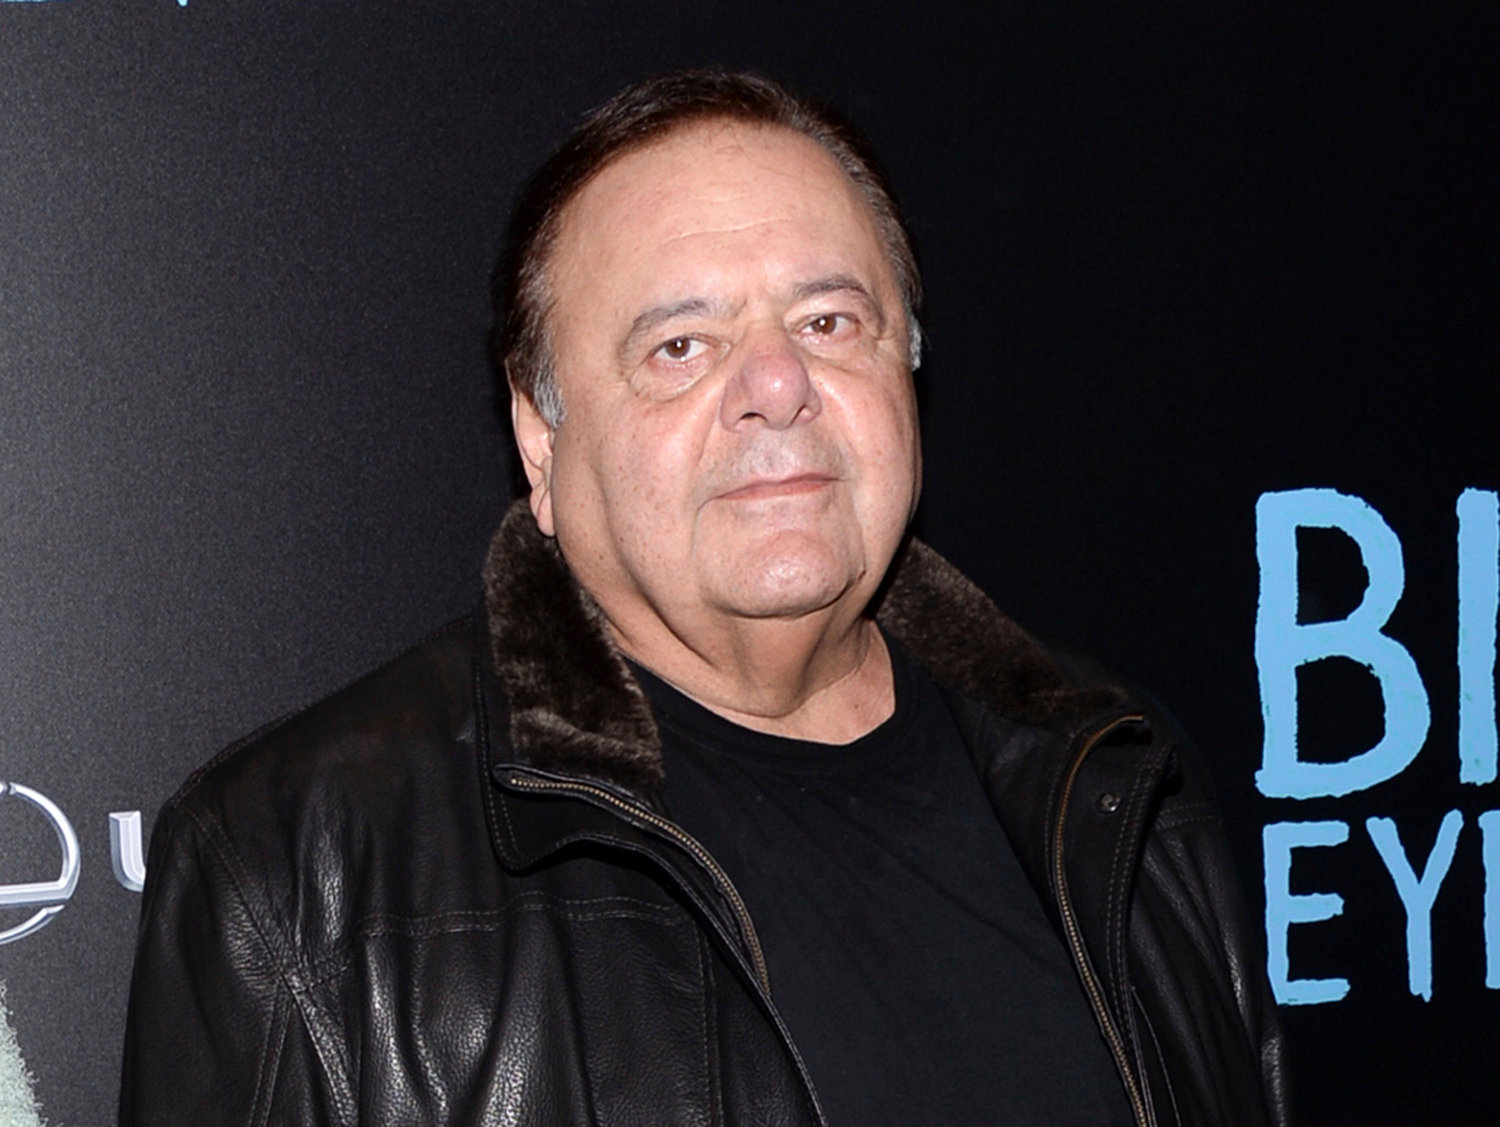 FILE - Paul Sorvino attends the "Big Eyes" premiere at the Museum of Modern Art on Dec. 15, 2014, in New York. Sorvino, an imposing actor who specialized in playing crooks and cops like Paulie Cicero in ‚ÄúGoodfellas‚Äù and the NYPD sergeant Phil Cerretta on ‚ÄúLaw &amp; Order,‚Äù has died. He was 83. (Photo by Evan Agostini/Invision/AP, File)